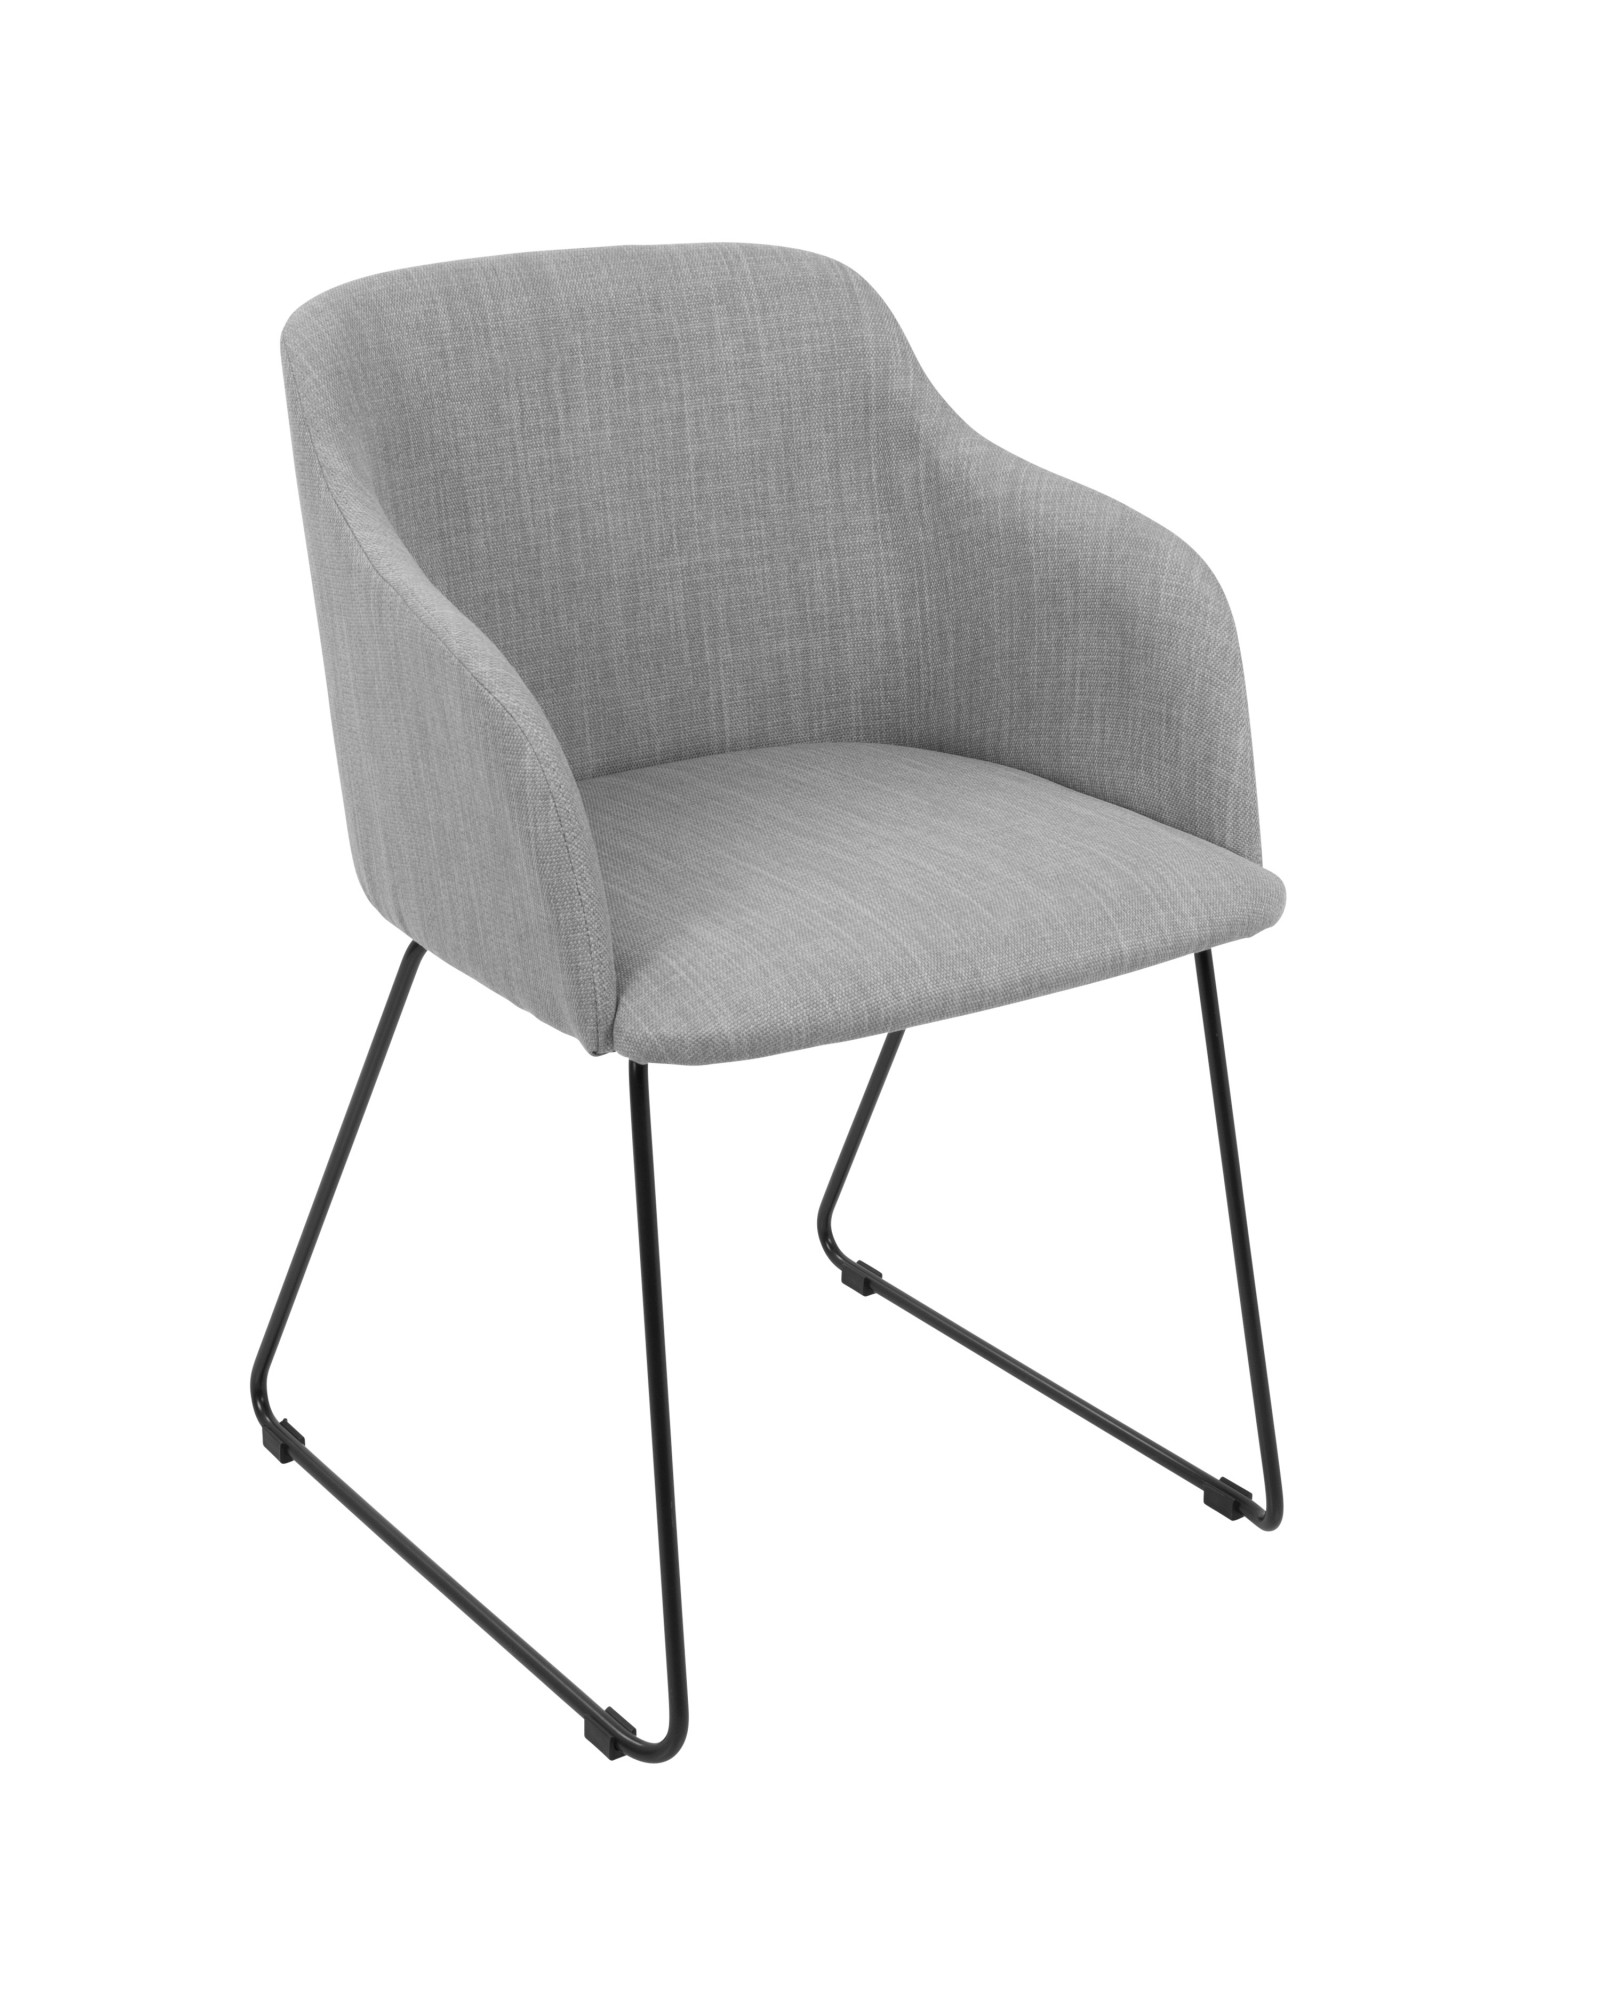 Daniella Contemporary Dining/Accent Chair in Light Grey - Set of 2